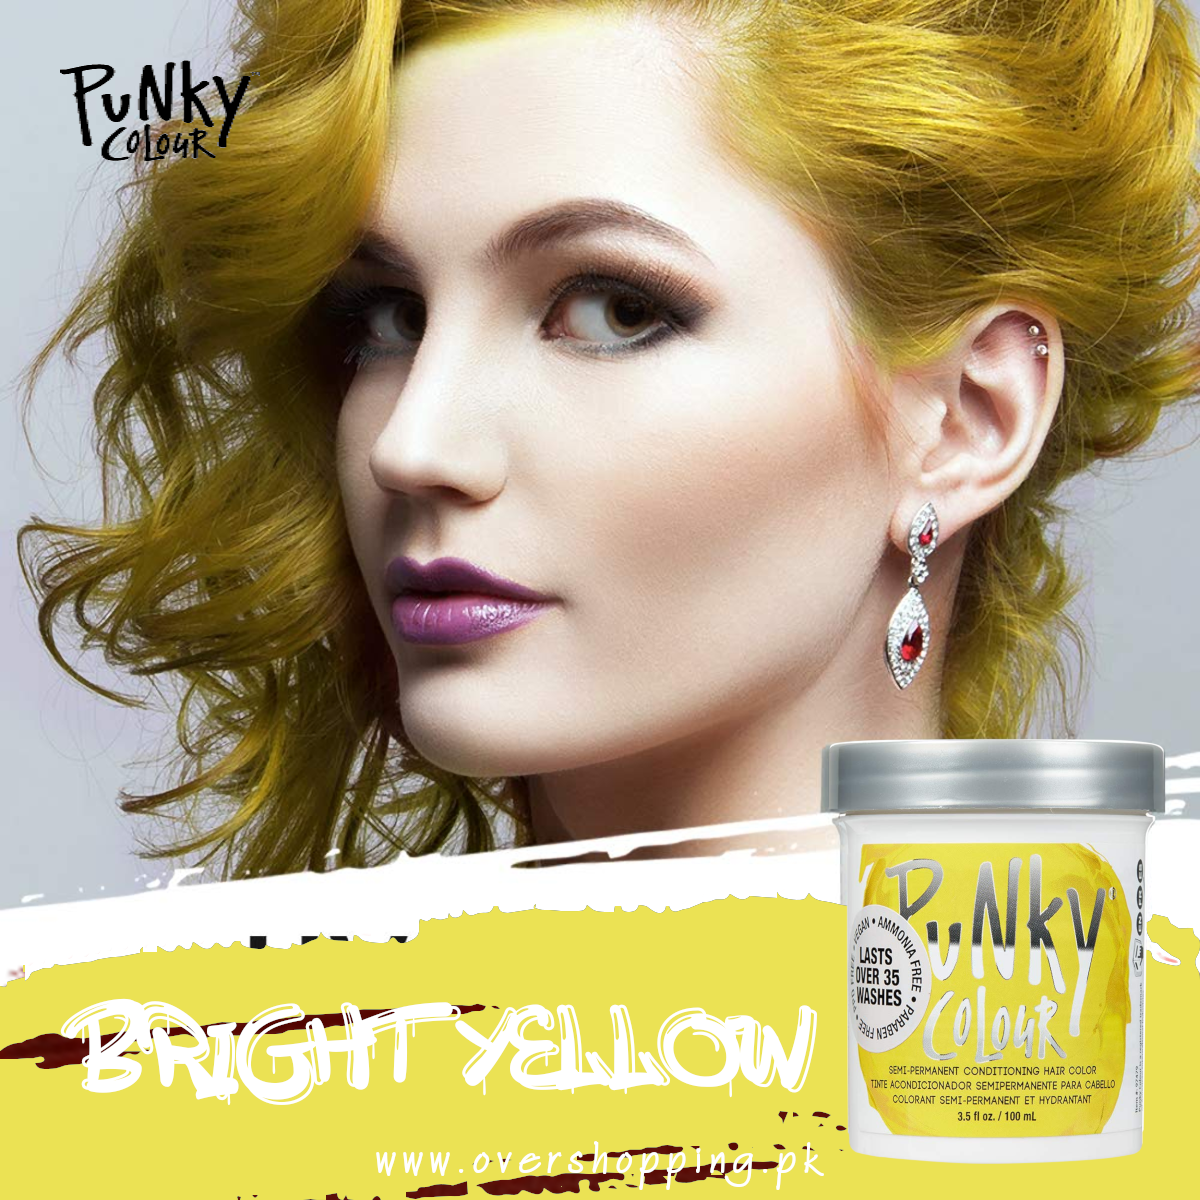 Punky Bright Yellow Semi Permanent Conditioning Hair Color lasts up to 35 washes, - 3.5 Fl.Oz (100ml)